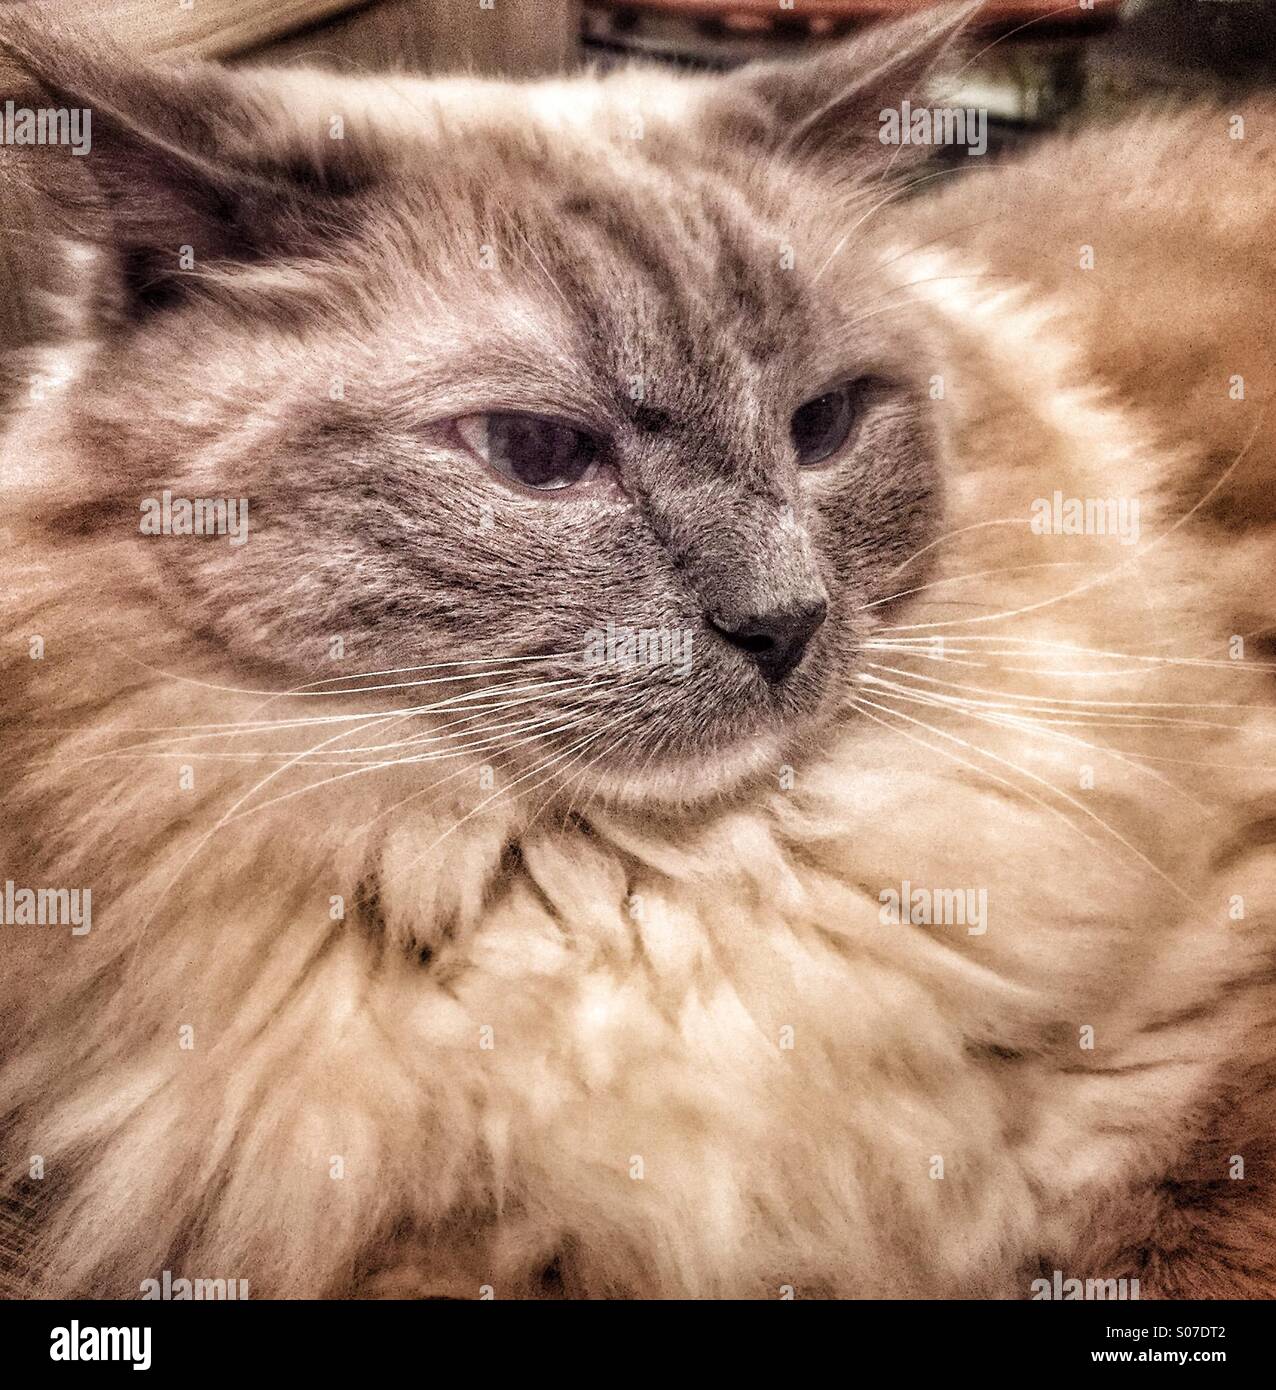 Close up of Long haired grumpy cat. Stock Photo